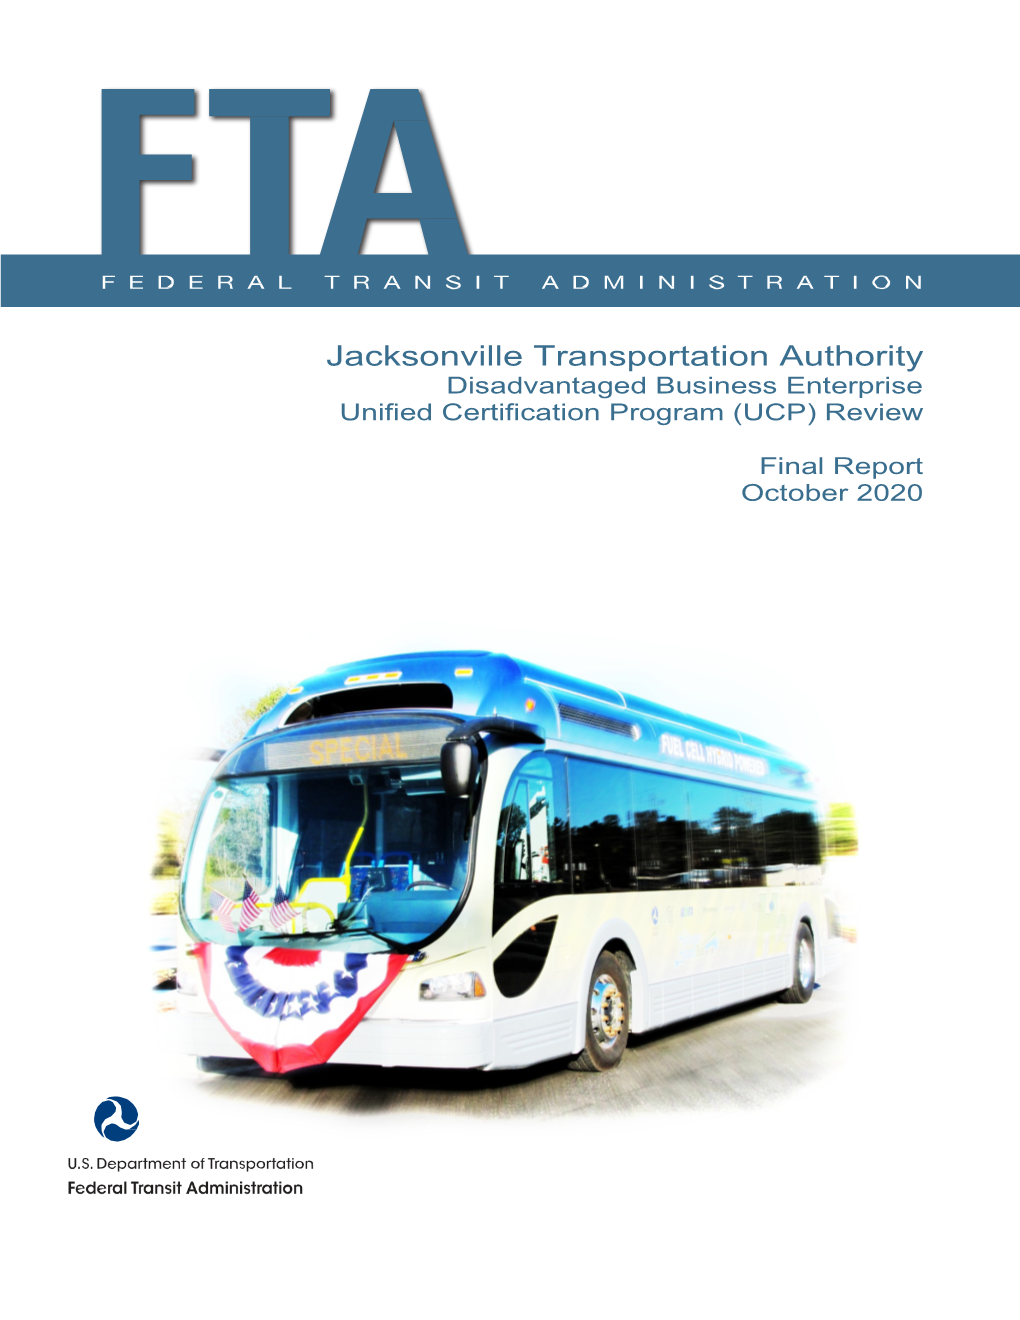 Jacksonville Transportation Authority Unified Certification Program (UCP) Compliance Review Final Report October 2020